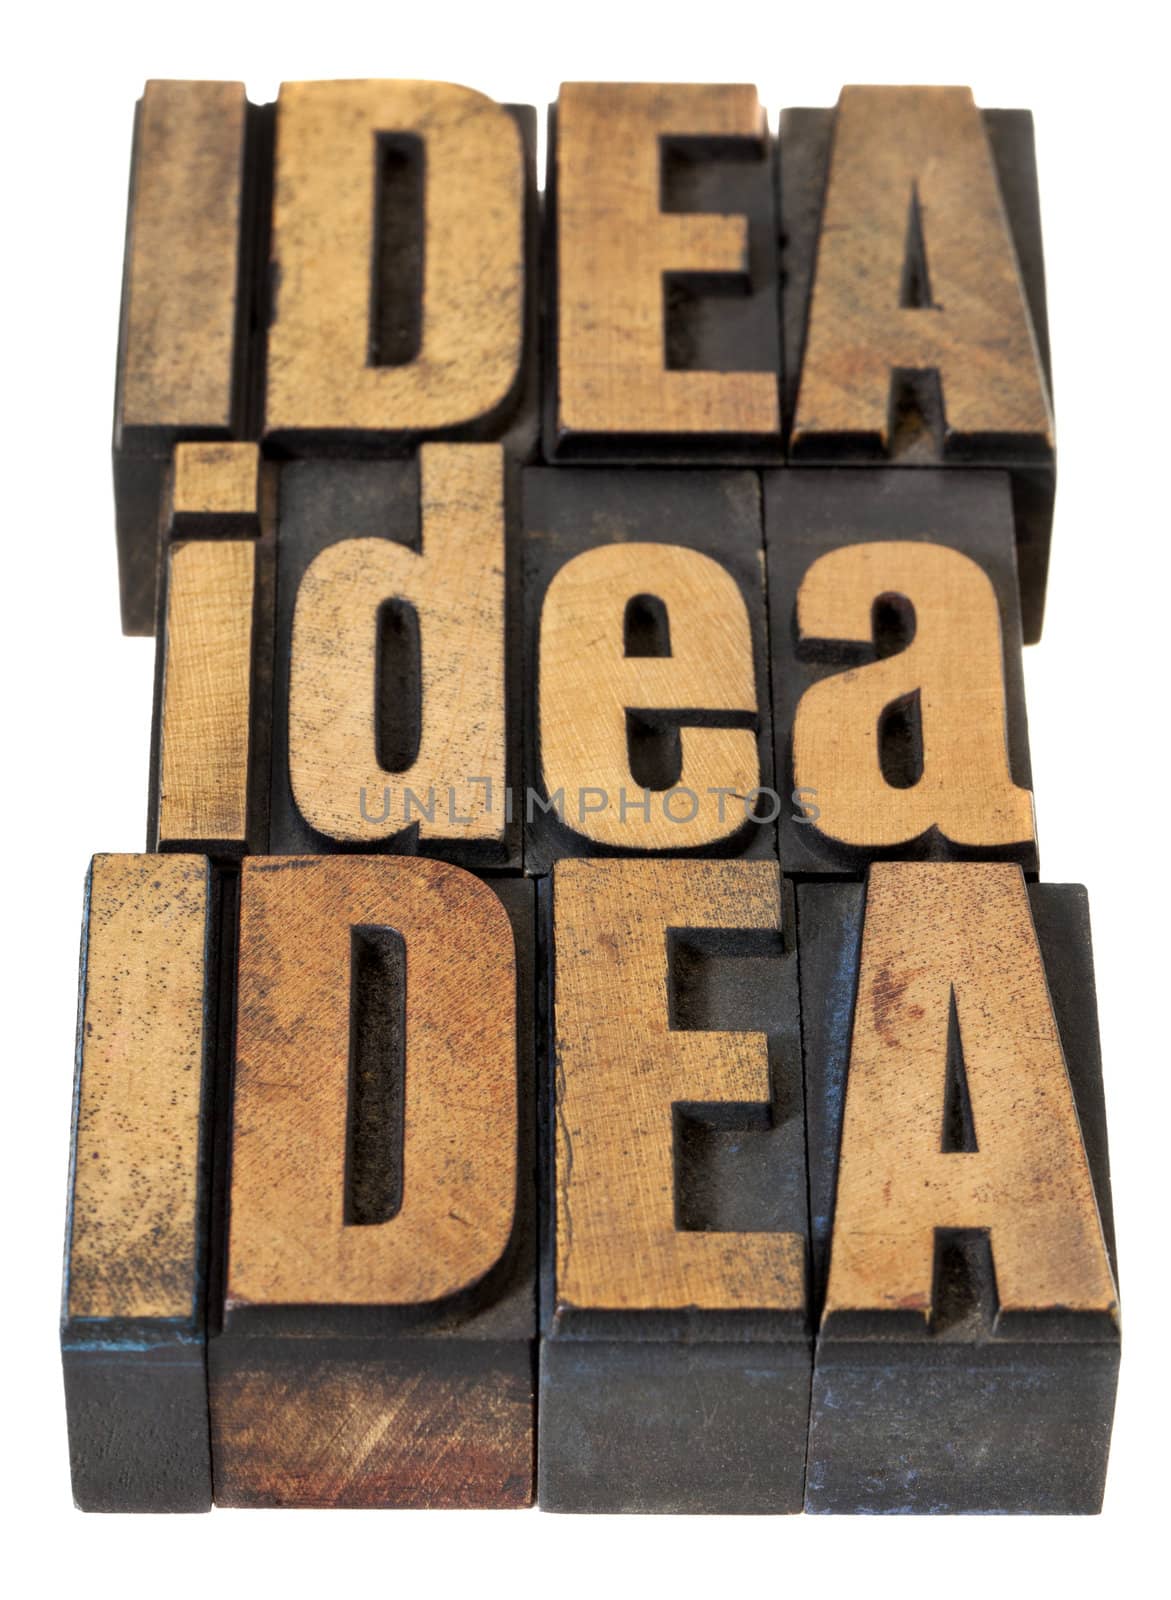 idea word abstract in wood type by PixelsAway